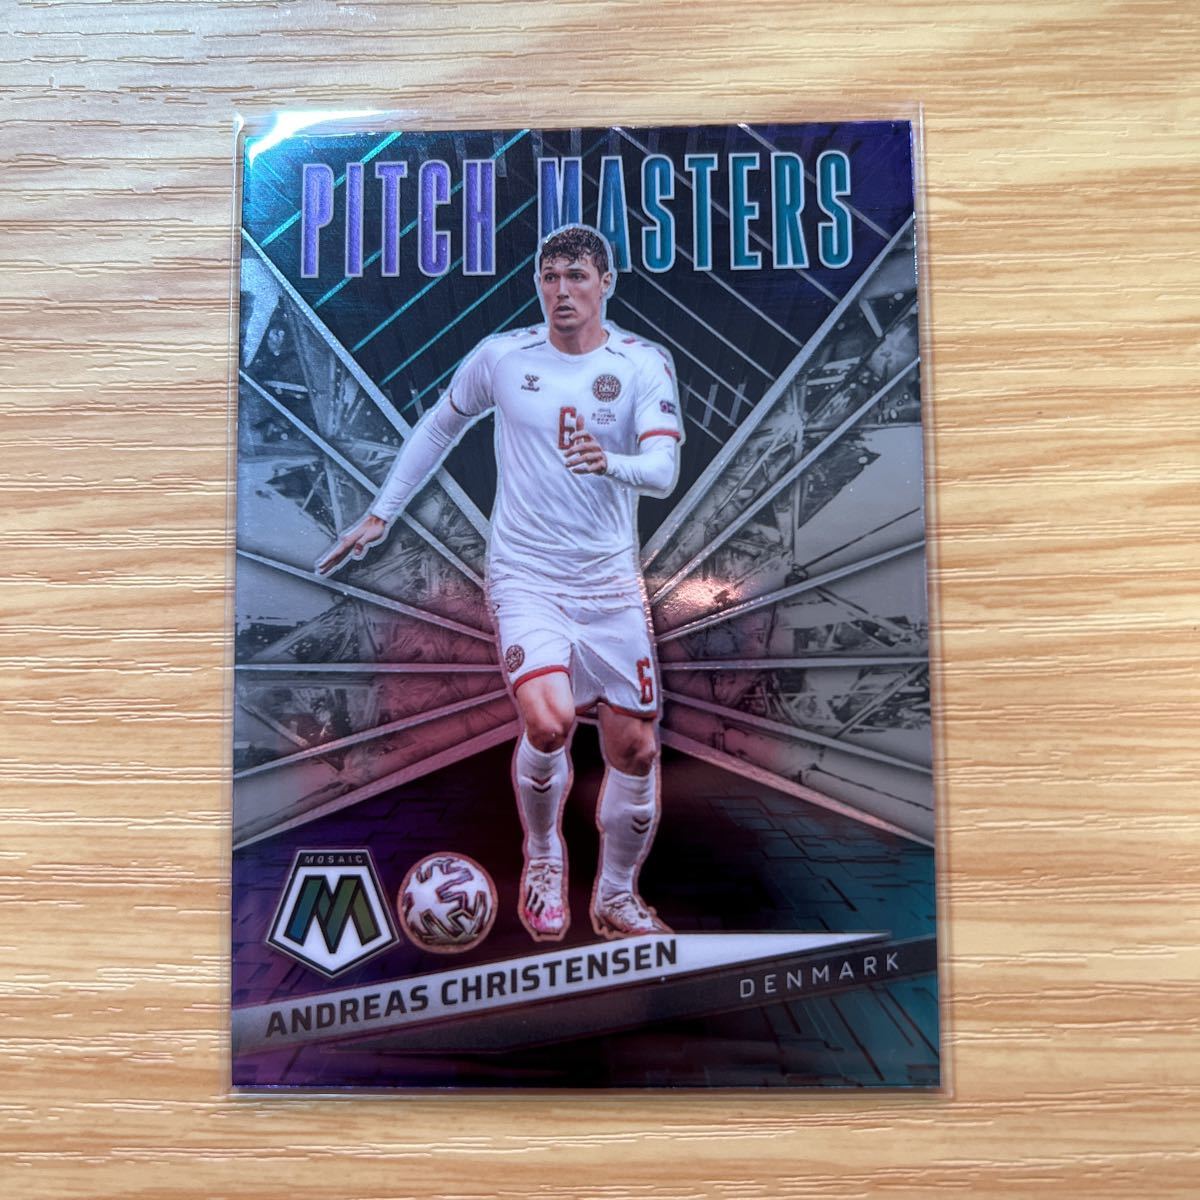 2022 Panini Mosaic Road to World Cup Andreas Christensen Picth Mastersの画像1